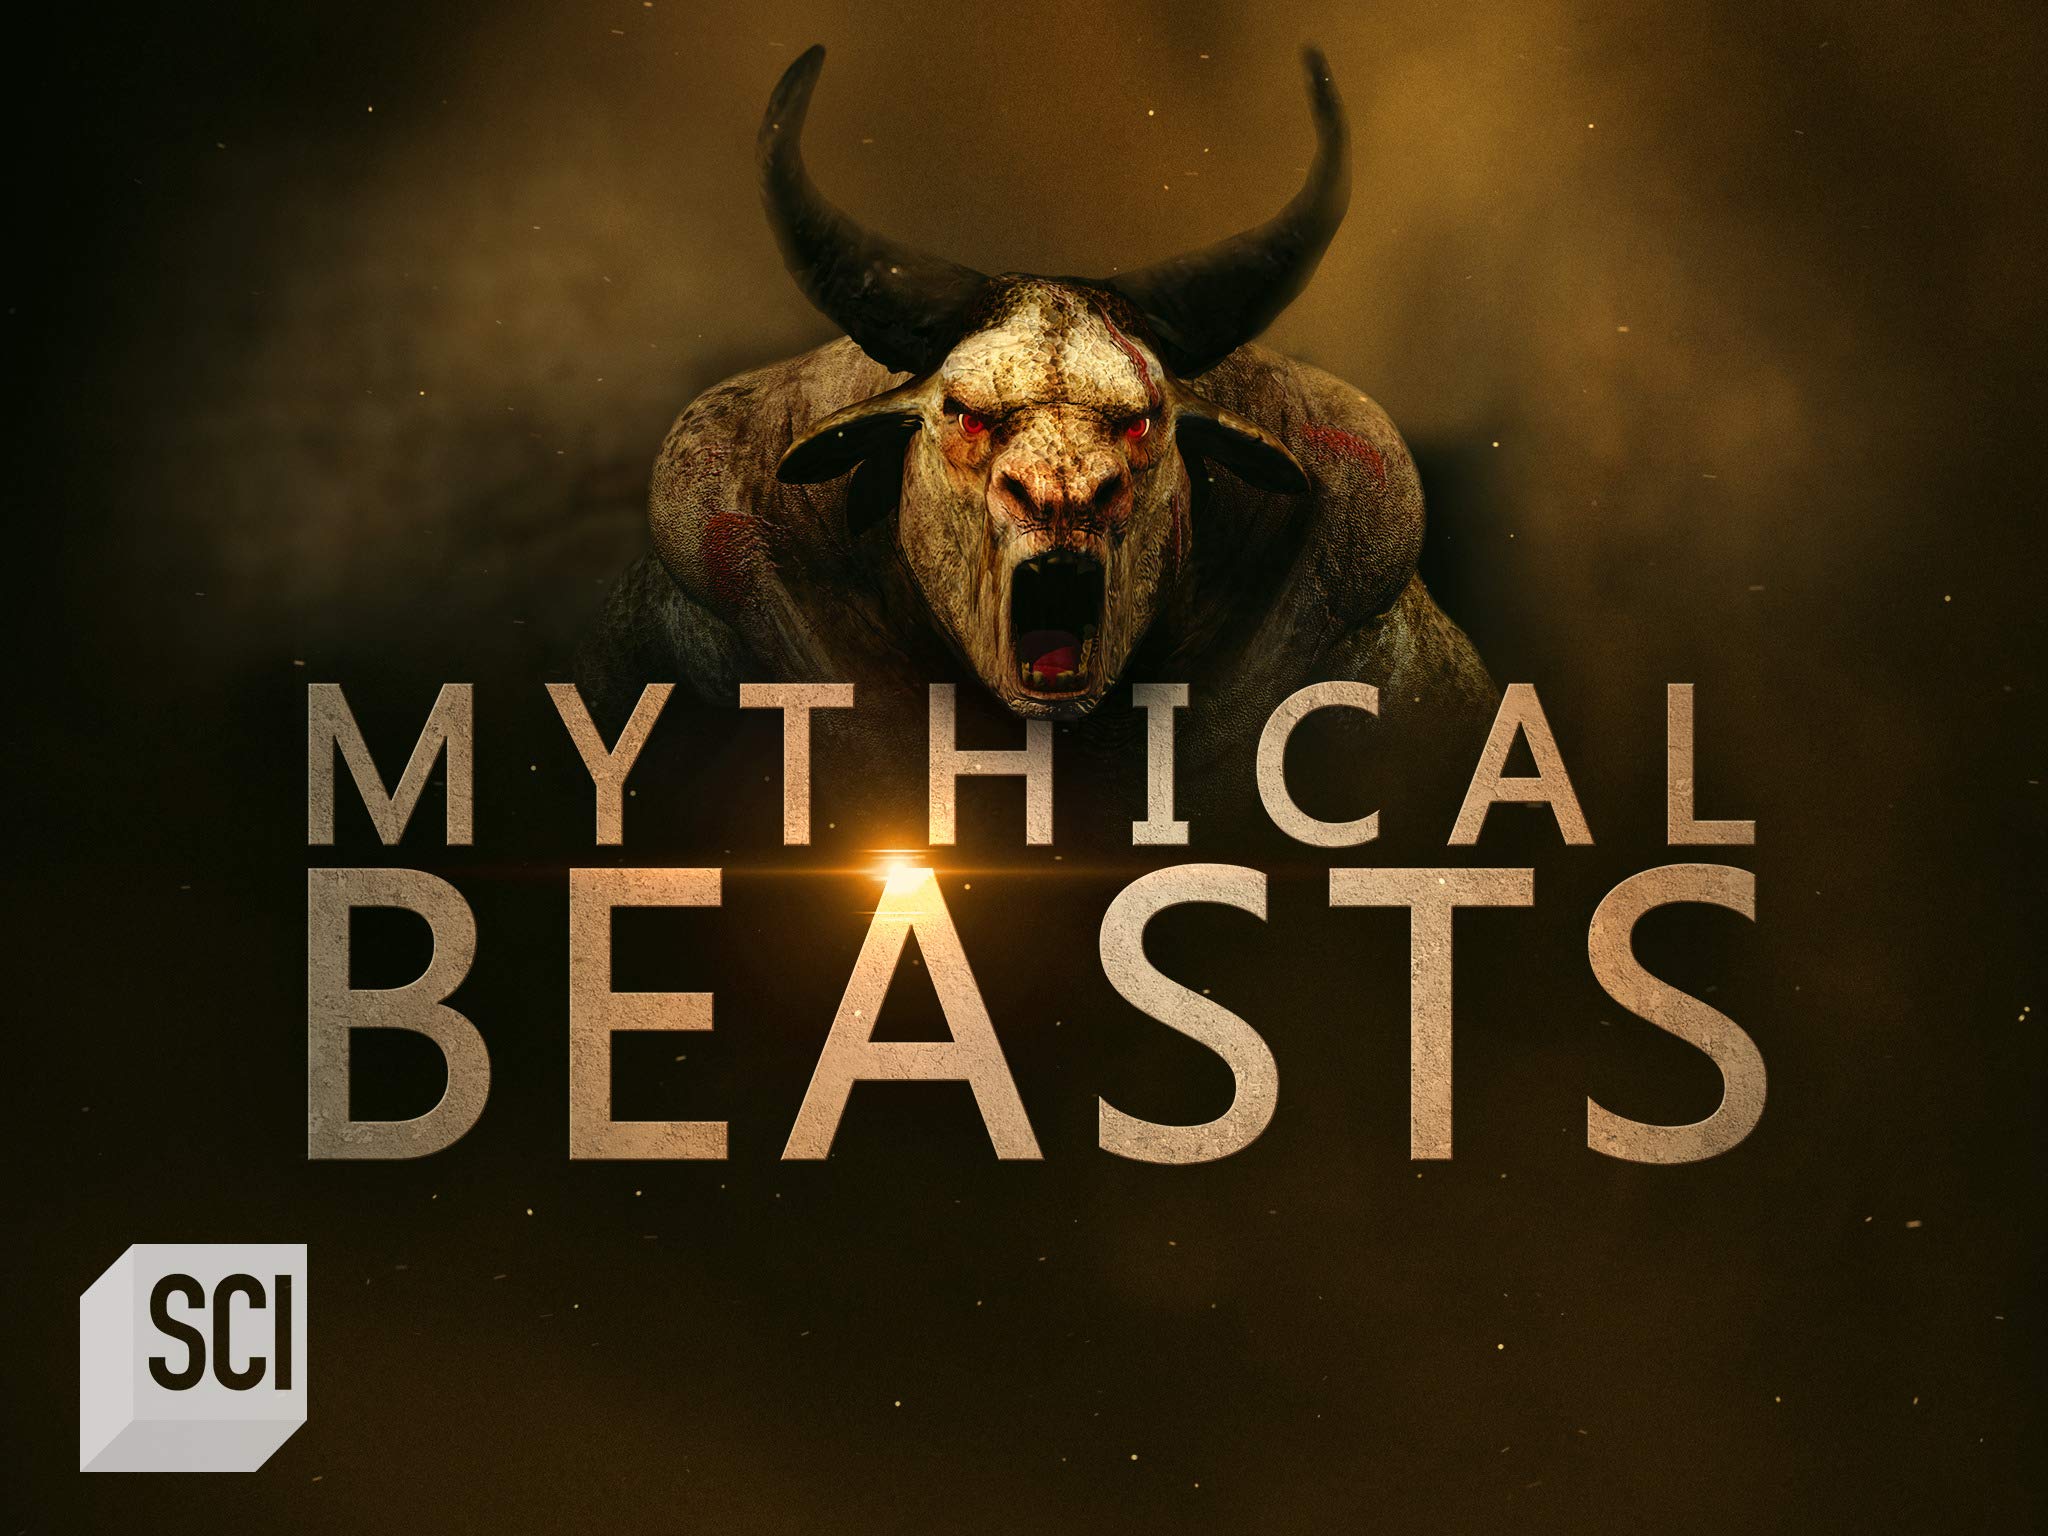 Mythical Beasts